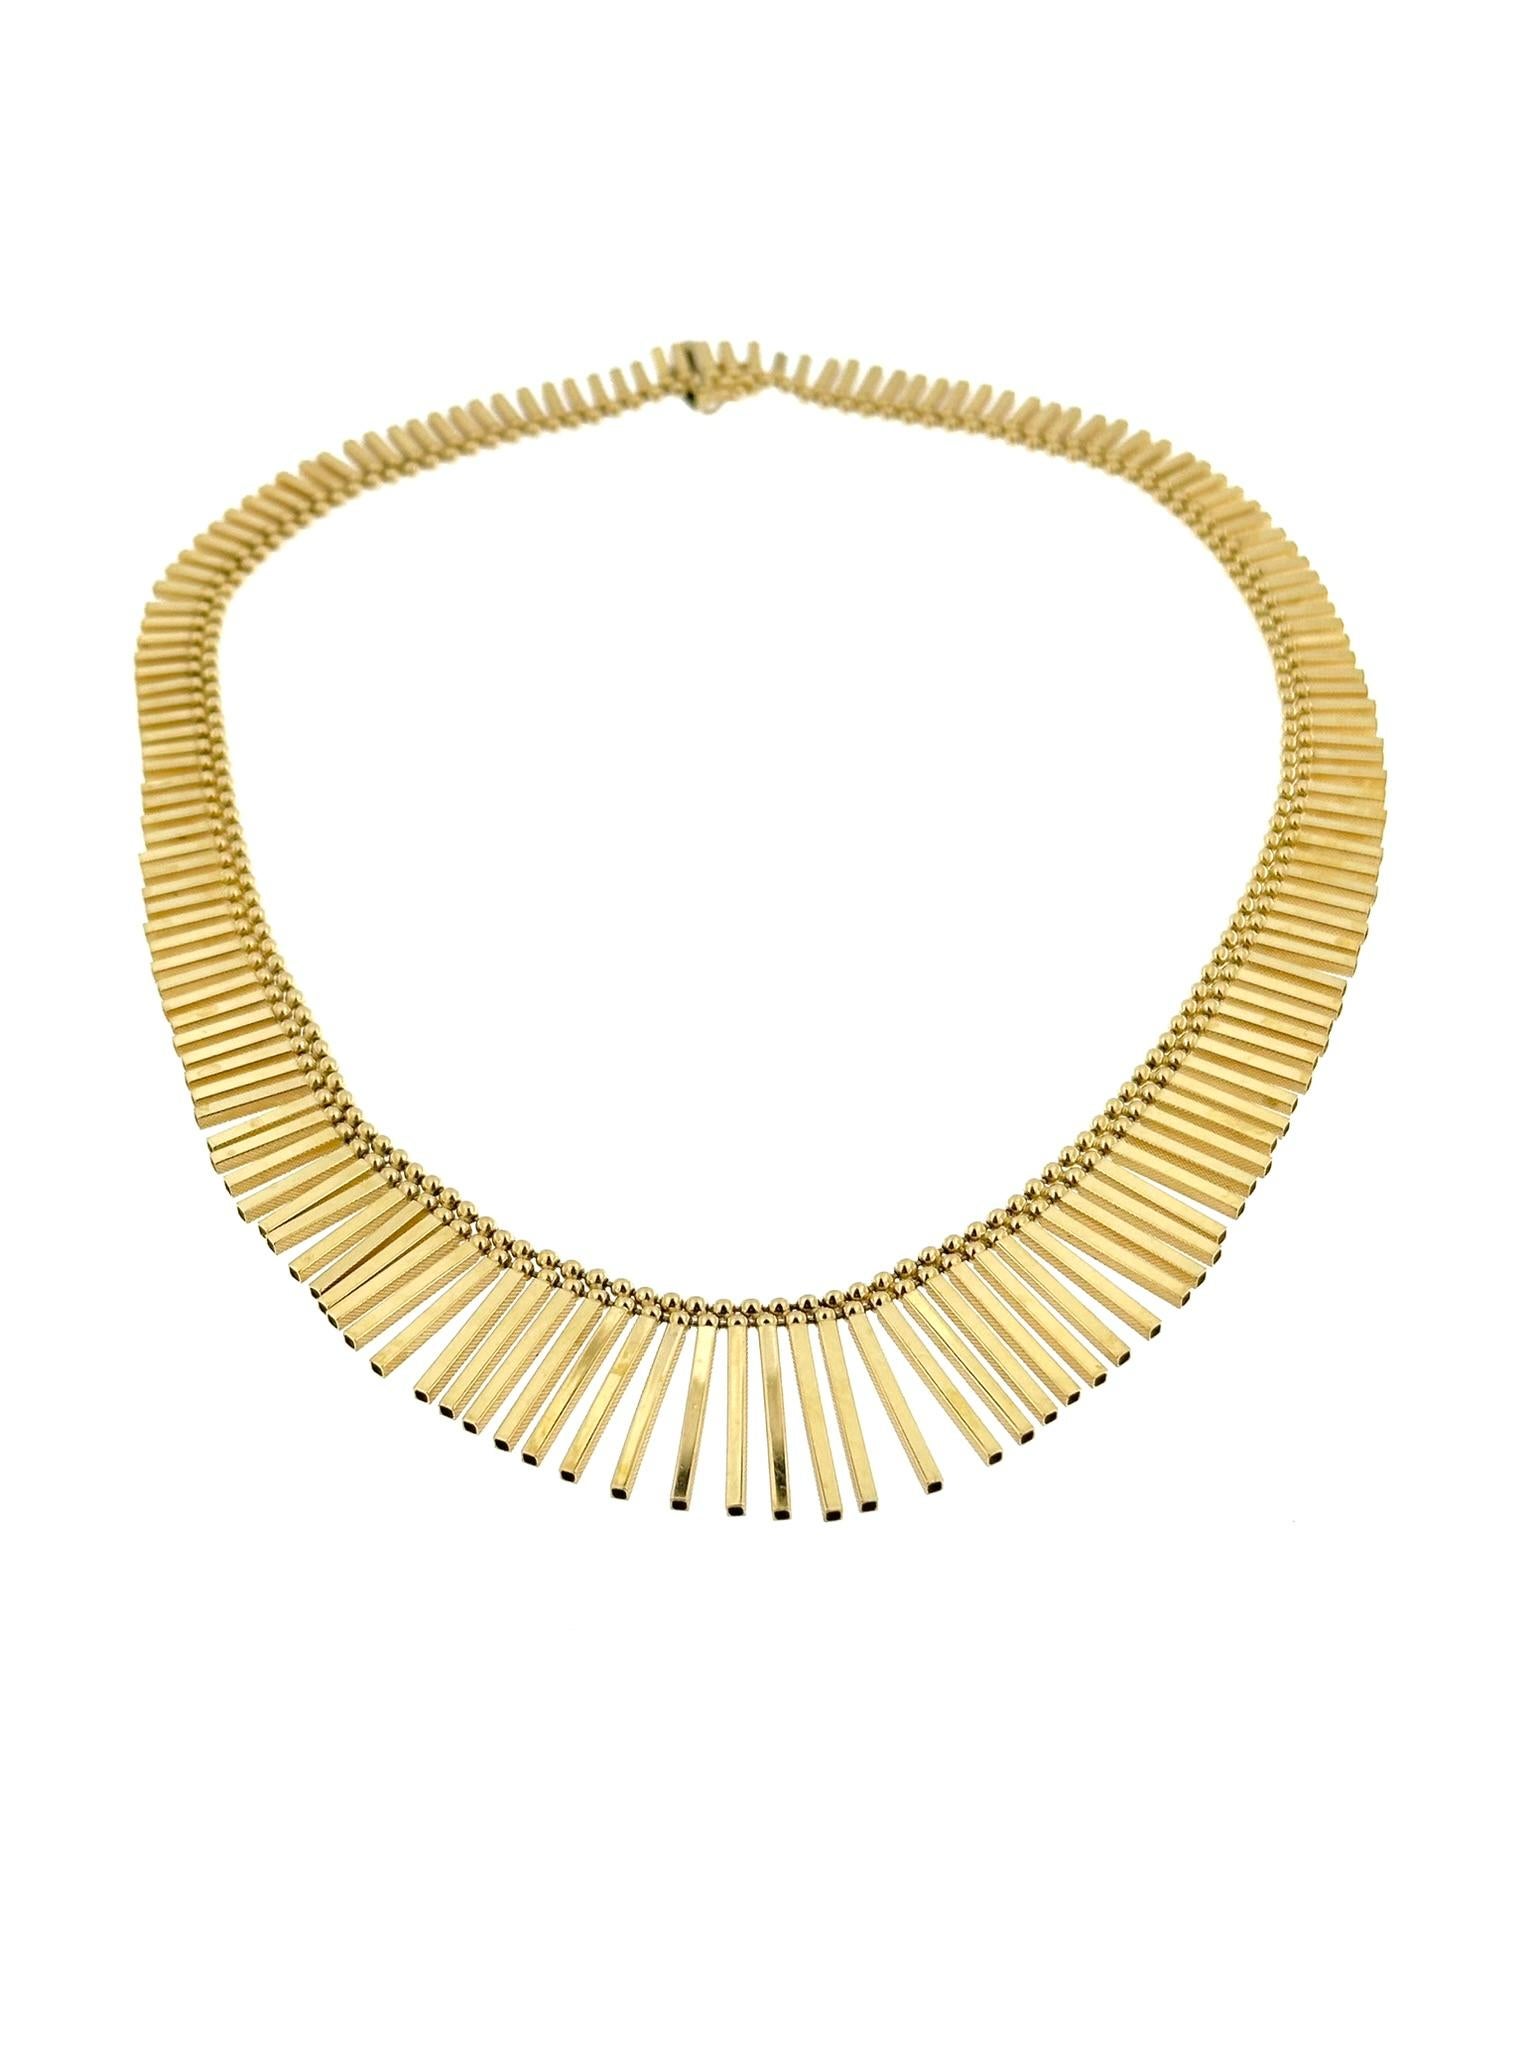 The Unoaerre Fringe Retro Yellow Gold Necklace is a luxurious and stylish piece of jewelry known for its high-quality craftsmanship and classic design. 

The Unoaerre Fringe Retro Gold Necklace is an exquisite piece crafted from 18kt yellow gold,